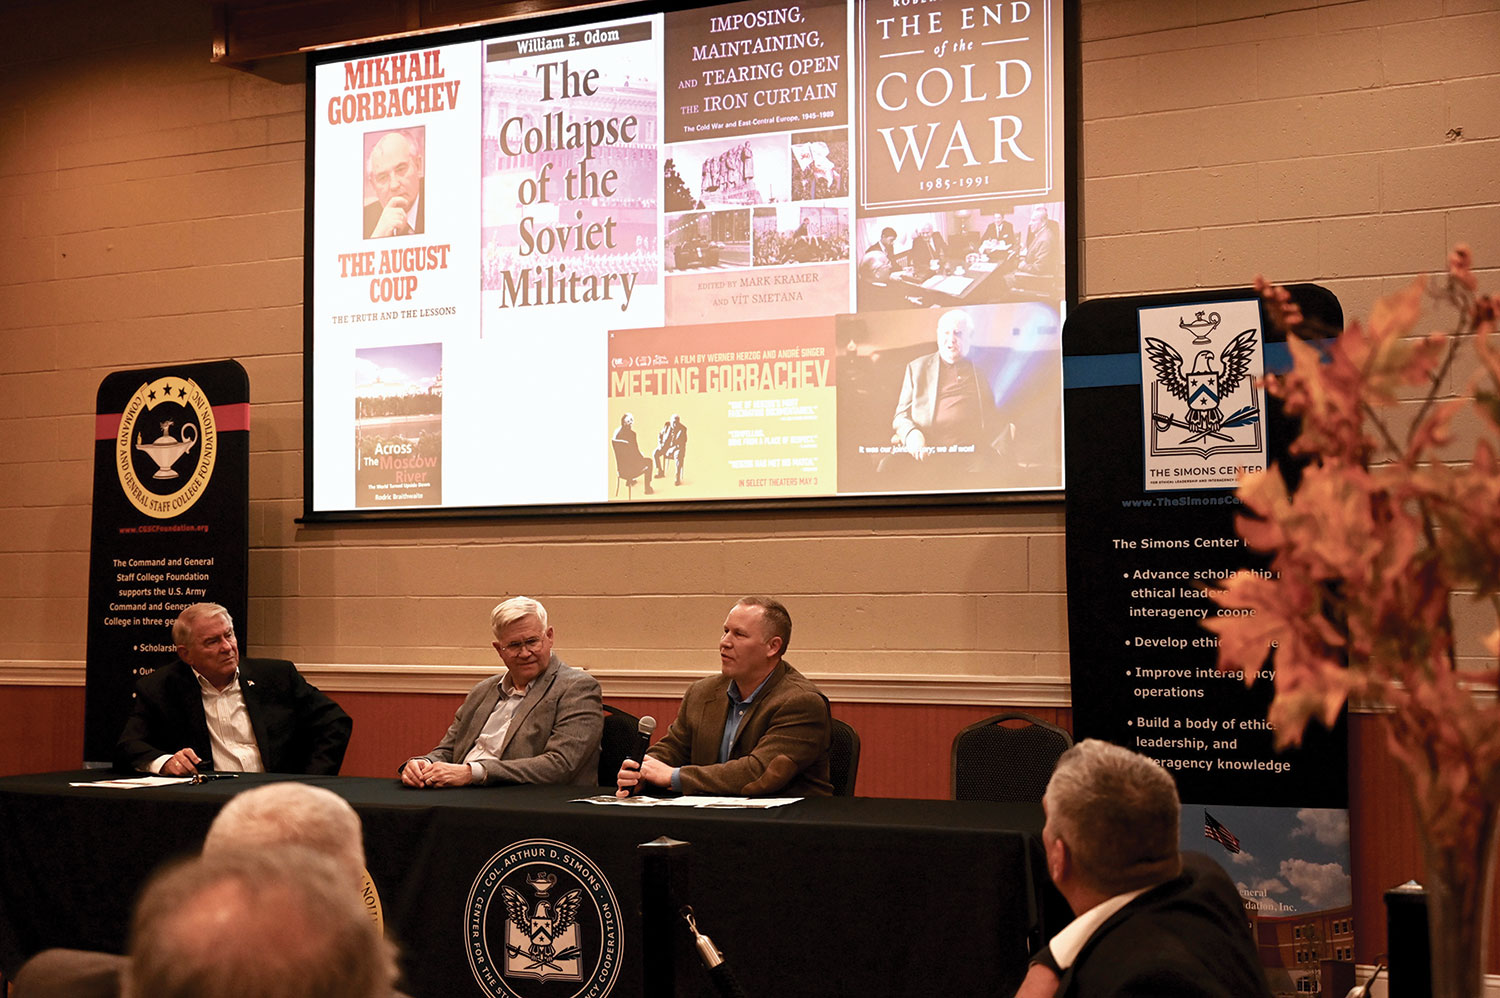 Robert Davis, right, Ph.D., Director, Goodpaster Scholars, School of Advanced Military Studies, describes some of the conditions leading to the decline of the Soviet Union during the kickoff of the Cold War Symposium on Nov. 9, 2021, at June’s Northland in Leavenworth, Kansas. Hosted by the CGSC Foundation’s Simons Center, the symposium will continue from December 2021 through February 2022 with virtual presentations each month by panels of experts. At Davis’ right is Col. (Ret.) Jon House, center, Ph.D., Professor Emeritus, CGSC Department of Military History, and Simons Center Bob Ulin, left.